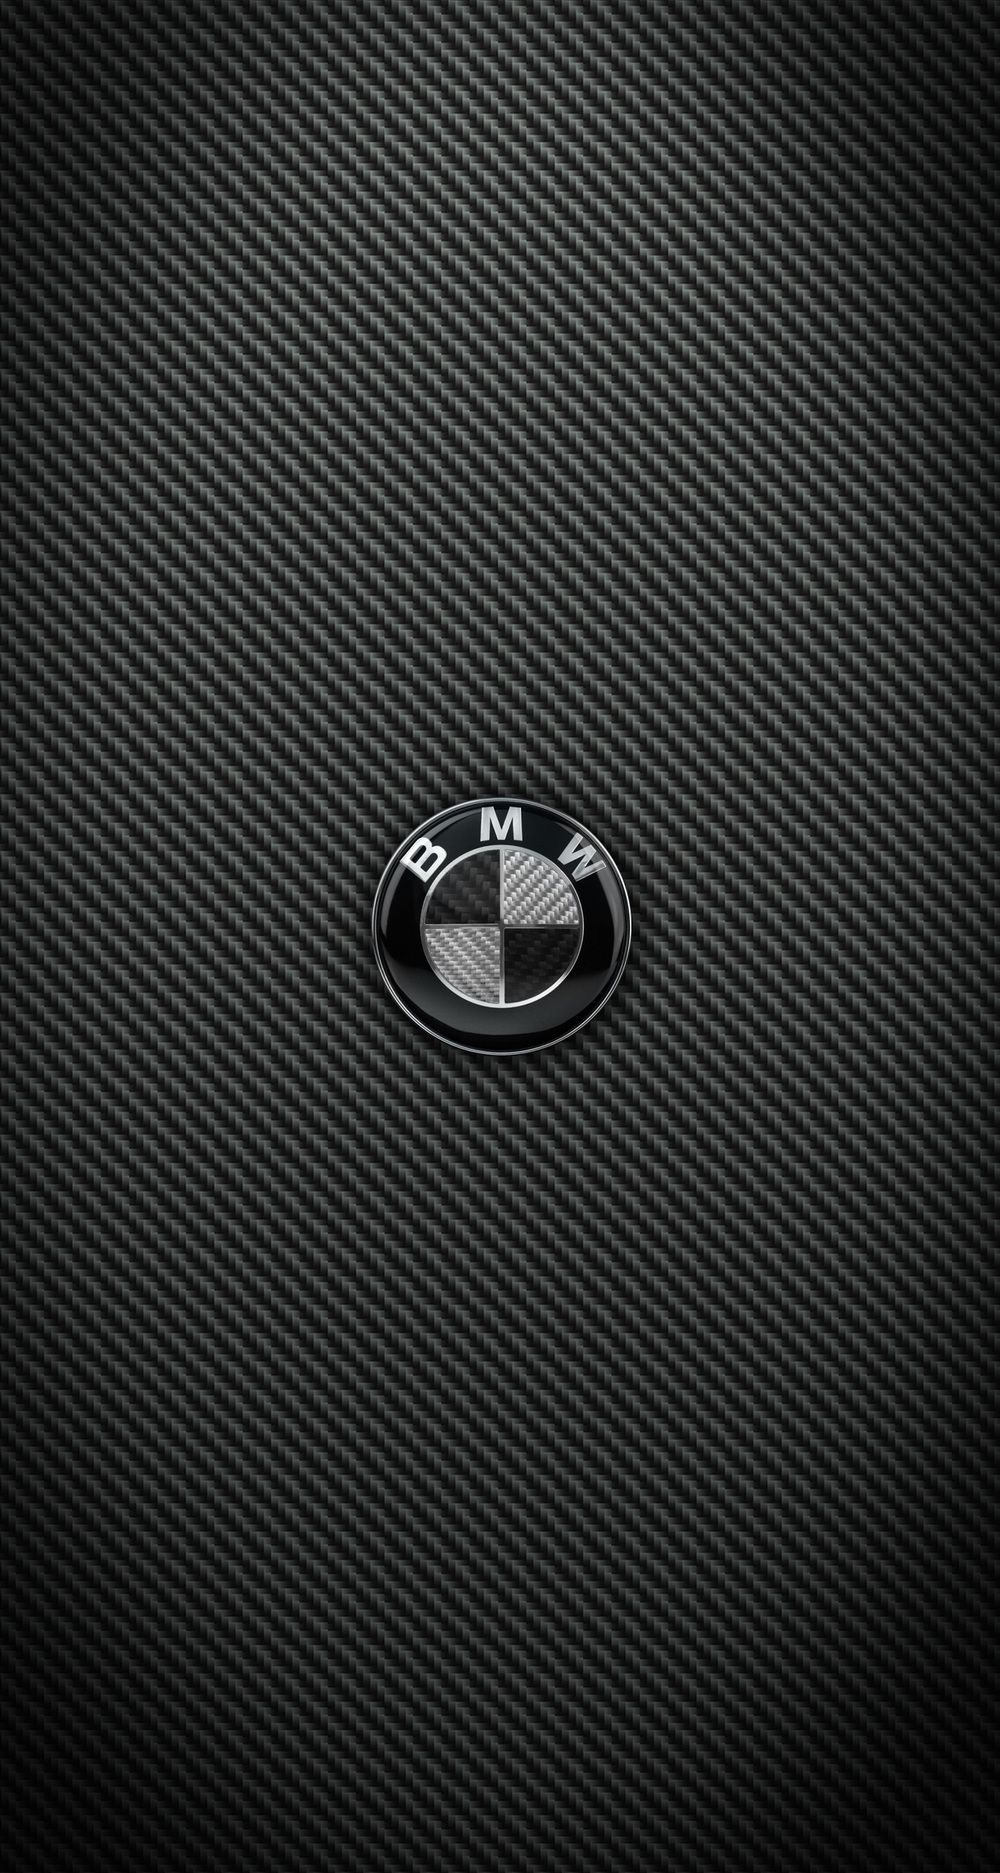 Carbon Fiber BMW and M Power iPhone wallpapers for iPhone 6 Plus